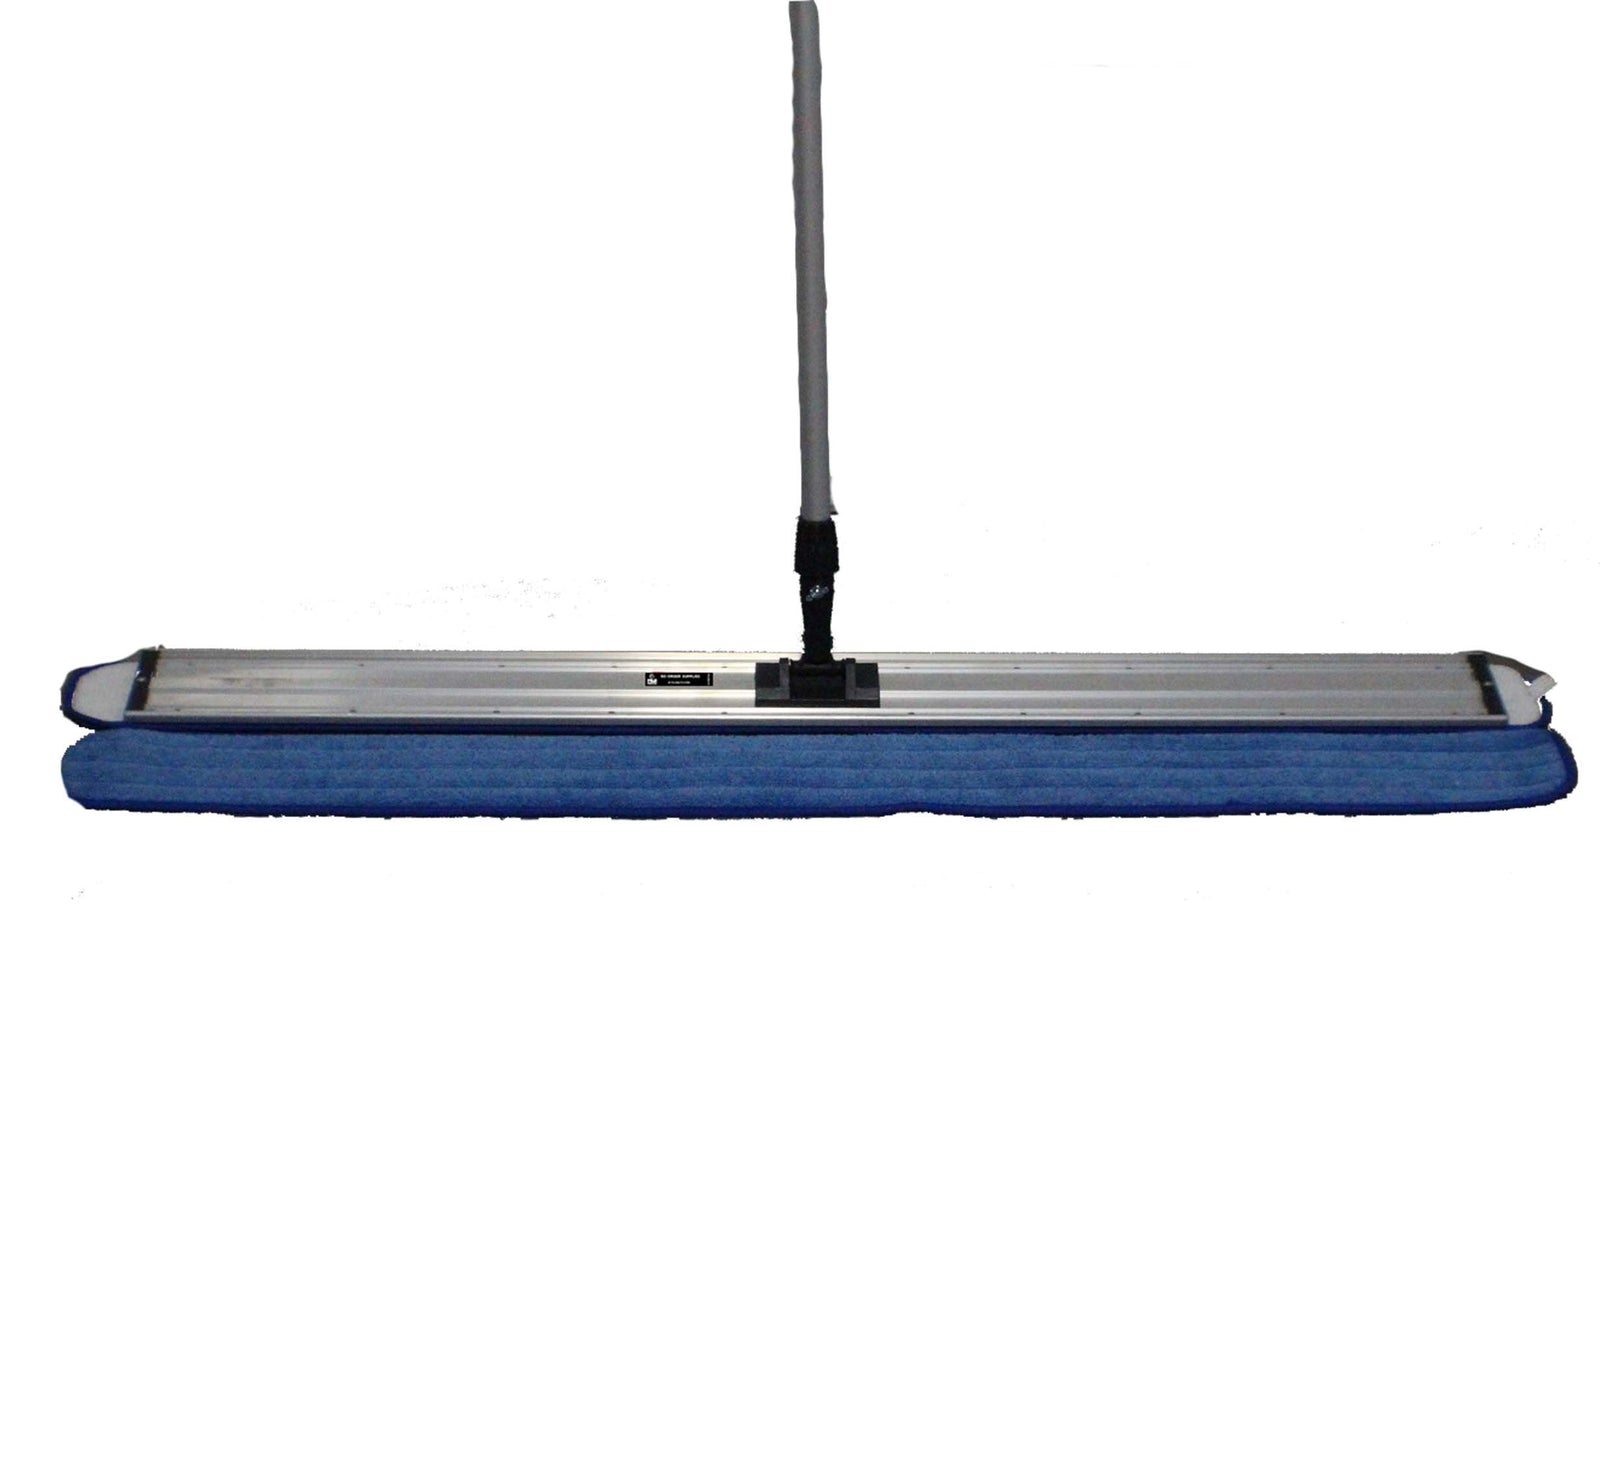 MOP SQUEEGEE COMPLETE 951 - G. Fox